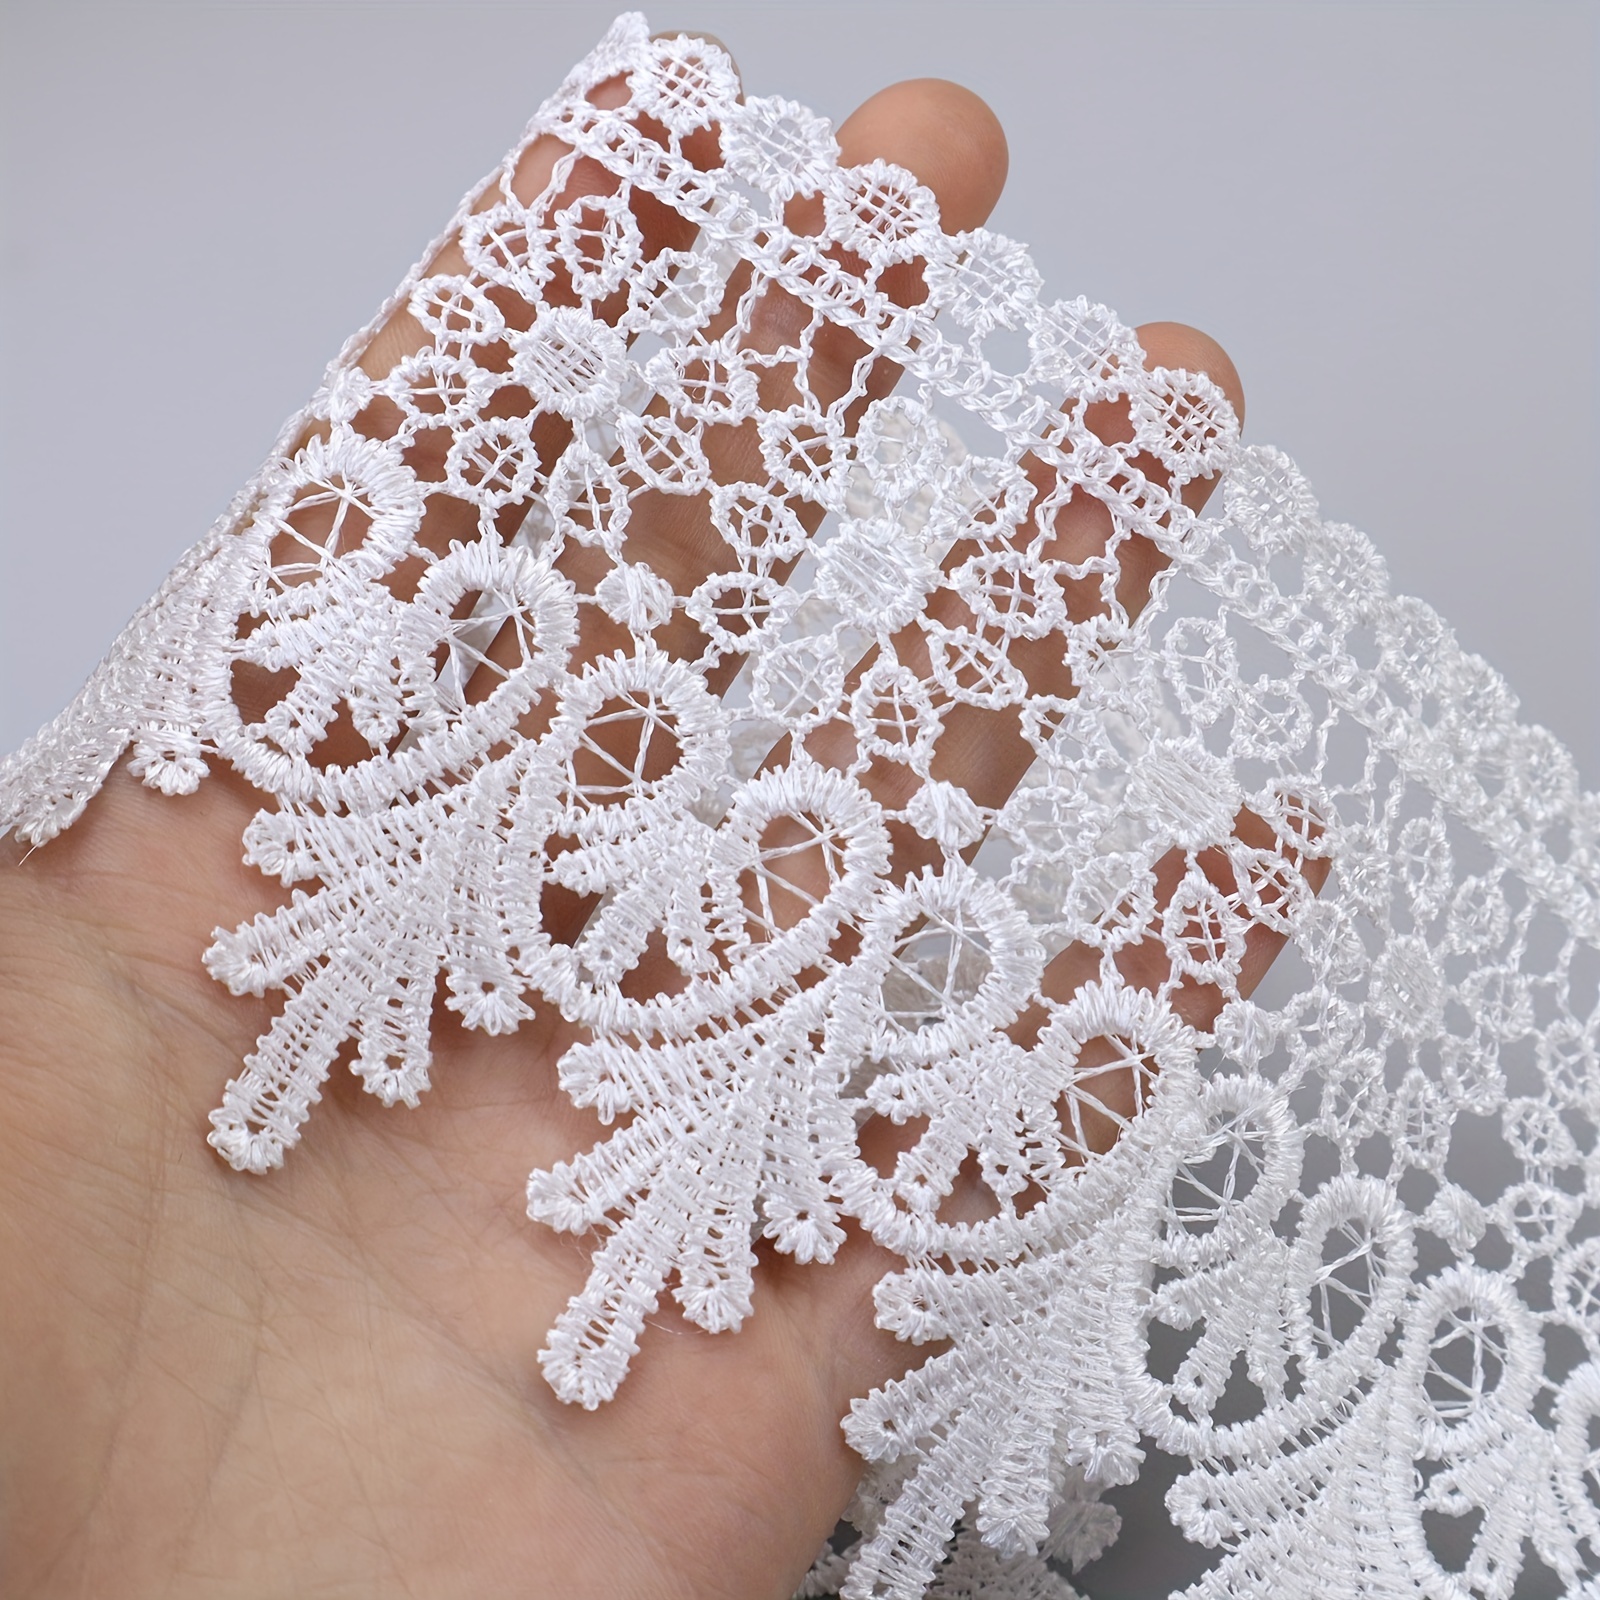 VGOODALL 3 Inch White Lace Ribbon, 10 Yards Wide Stretchy Lace Trim Elastic  Floral Lace for Bridal Wedding Decoration Gift Wrapping DIY Sewing Craft